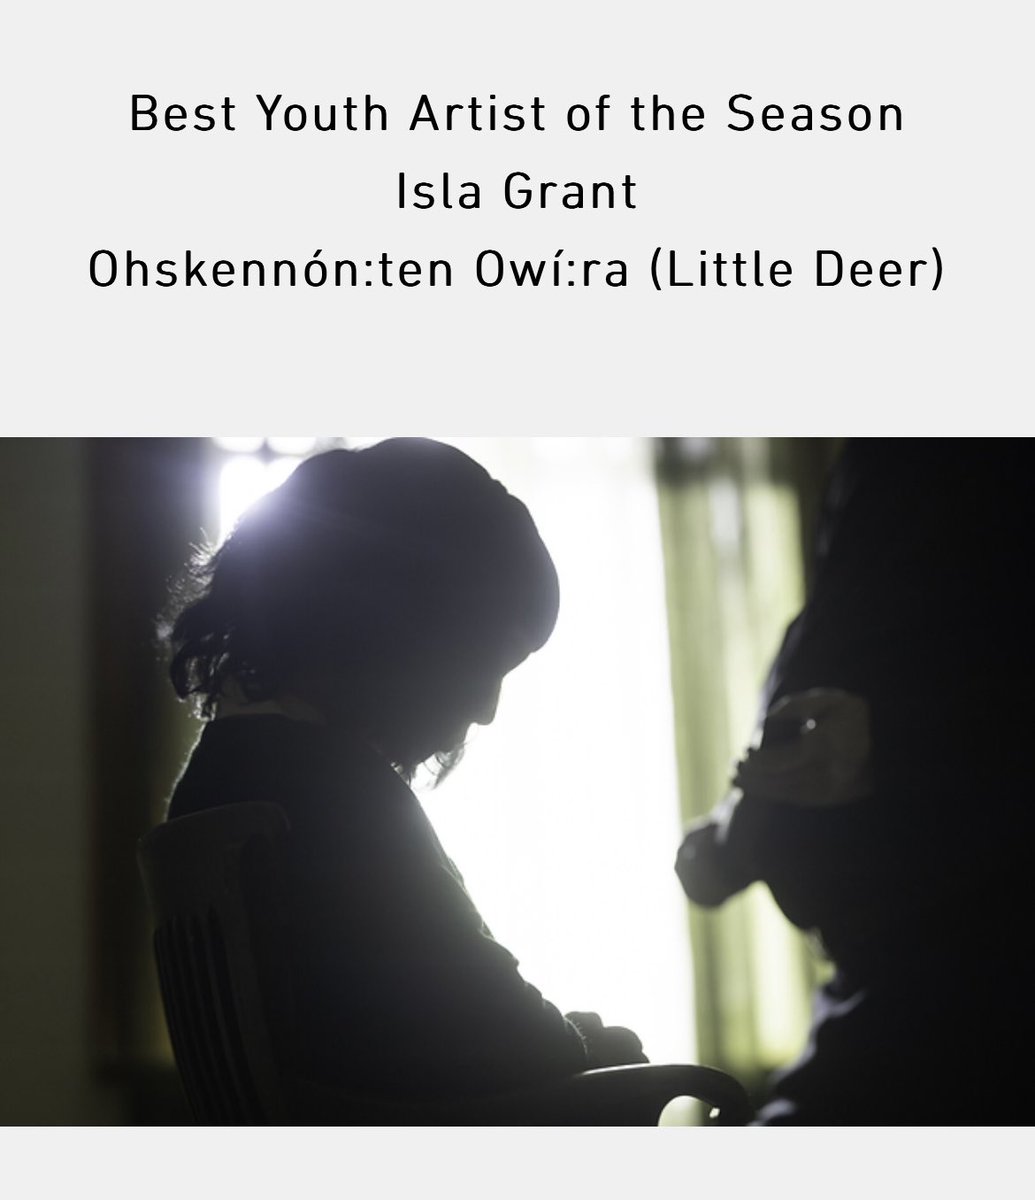 Excited to share that my daughter Isla was just named Best Youth Artist by the Montreal Independent Film Festival. This honour was for her role in the upcoming short film “Little Deer” about two young #residentialschool survivors. @jonbelliott44 #indigenousfilm #firstnations